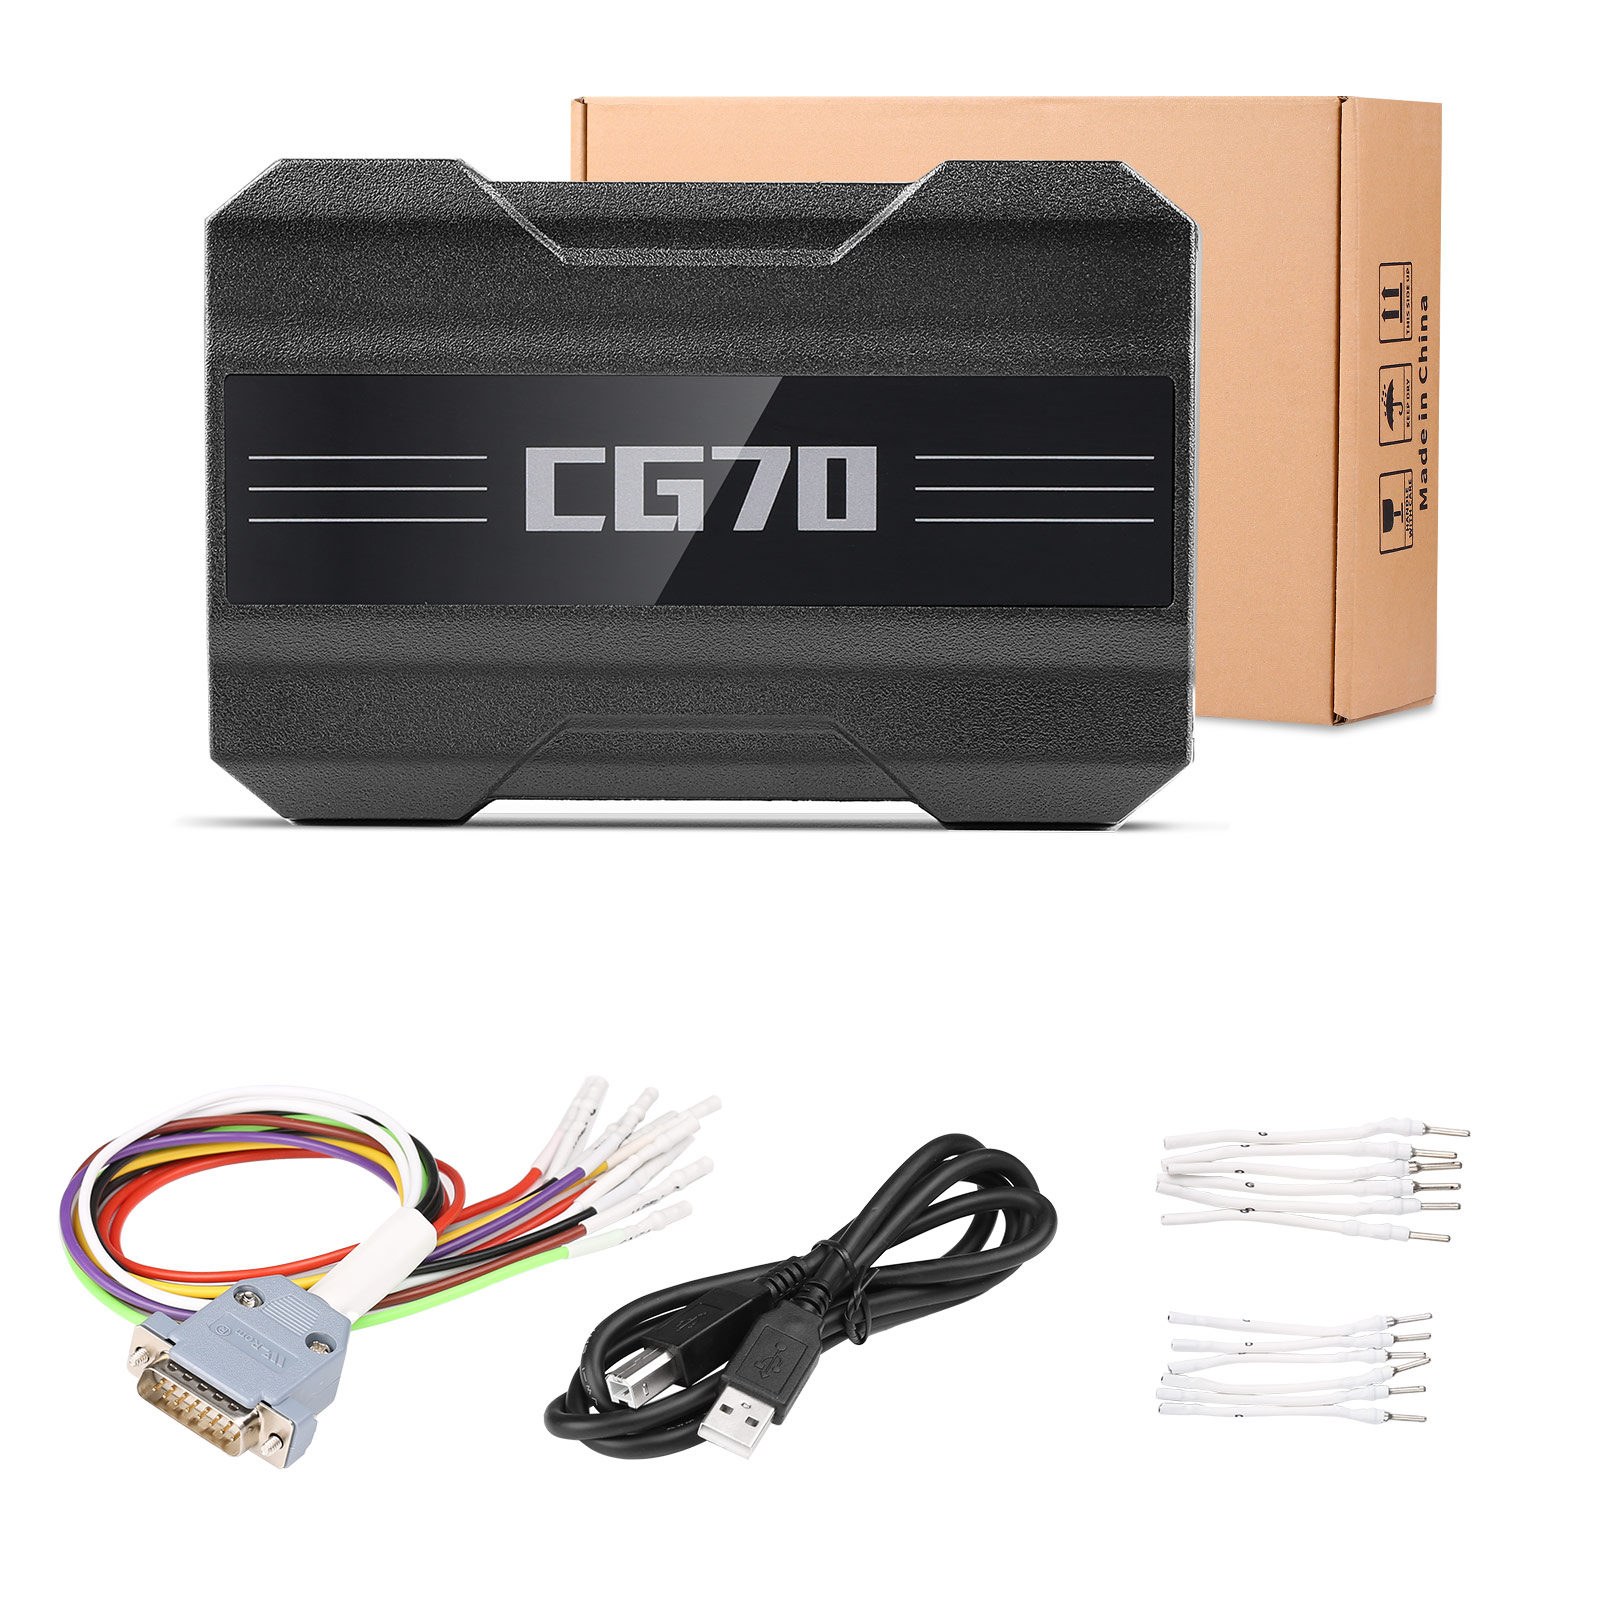 CGDI CG70 package includes